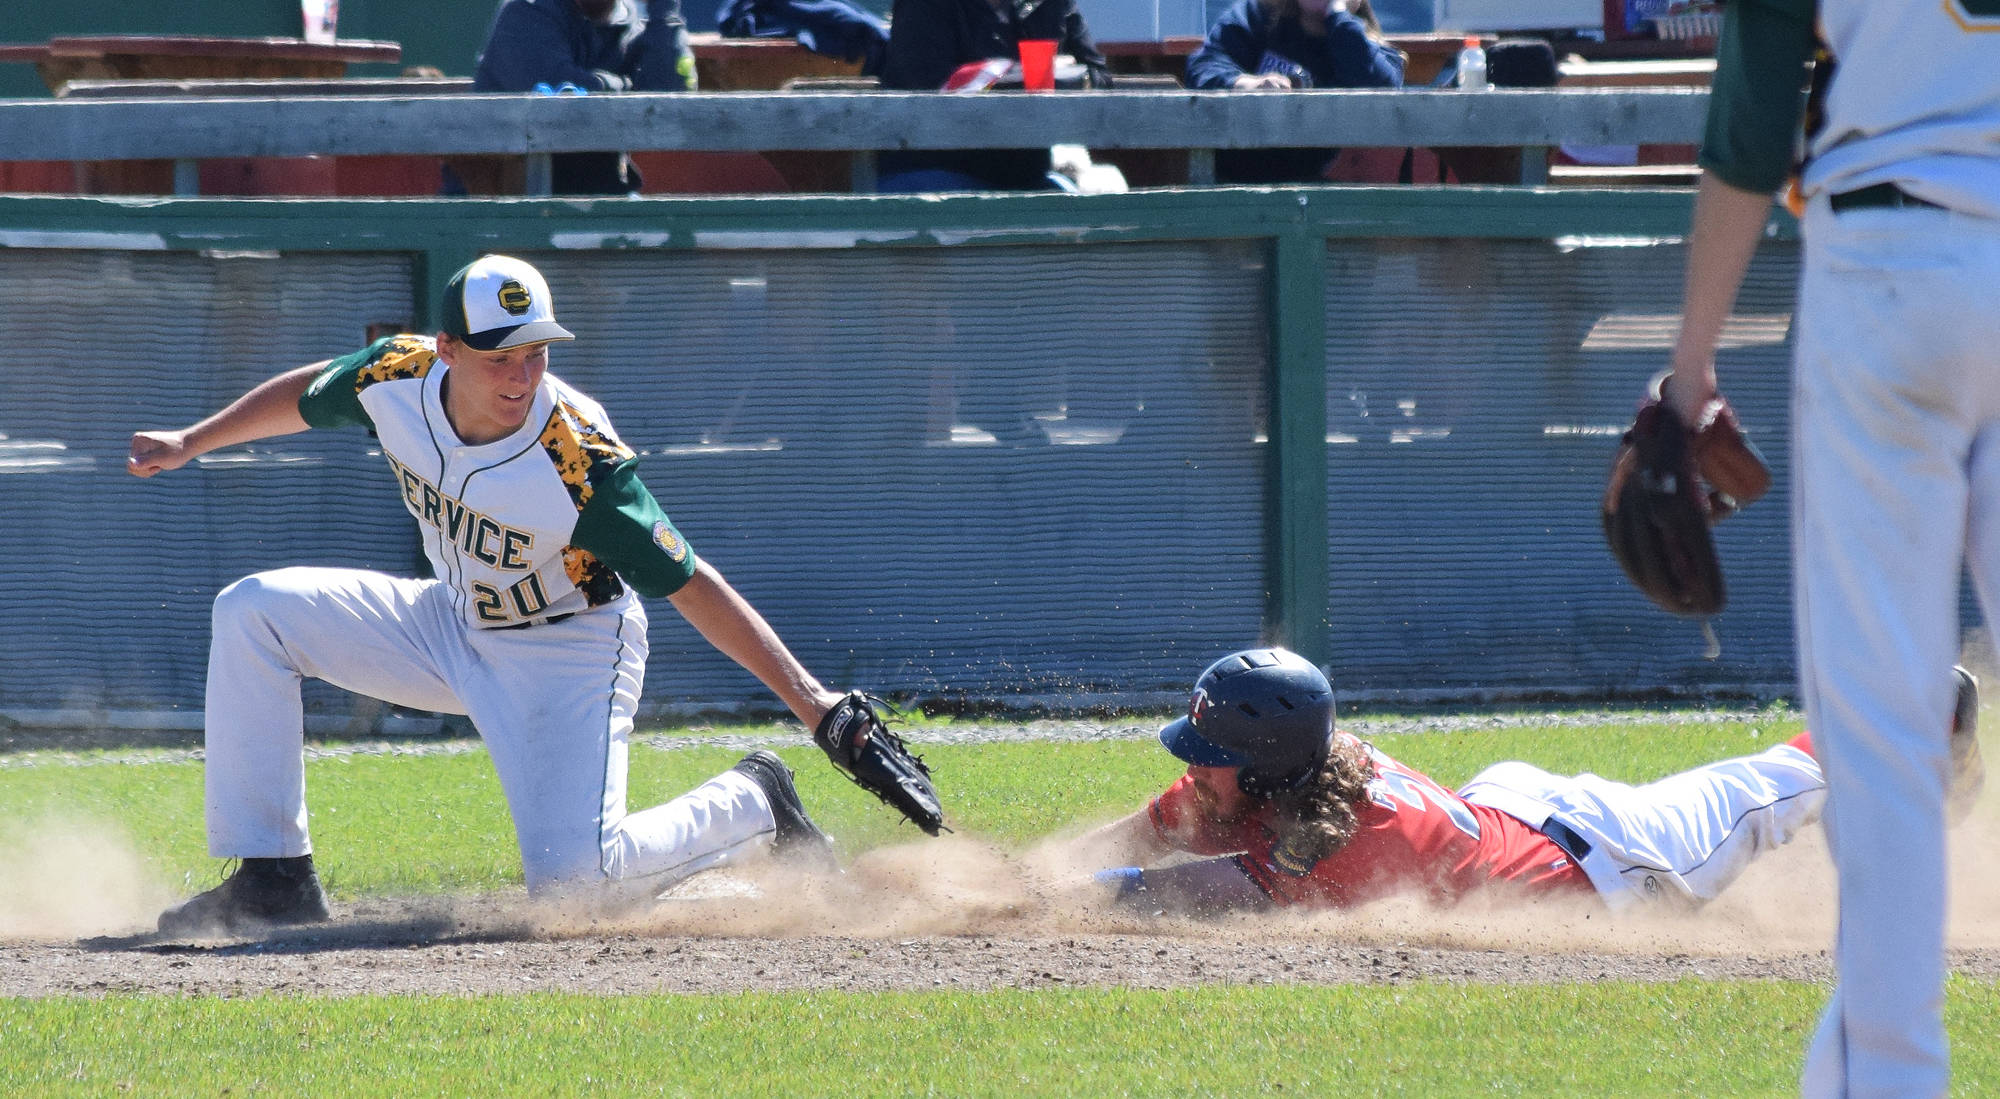 Service third baseman Henry Helgeson (20) loses the ball while attempting to tag Twins baserunner David Michael, Tuesday afternoon at Coral Seymour Memorial Ballpark in Kenai. (Photo by Joey Klecka/Peninsula Clarion)